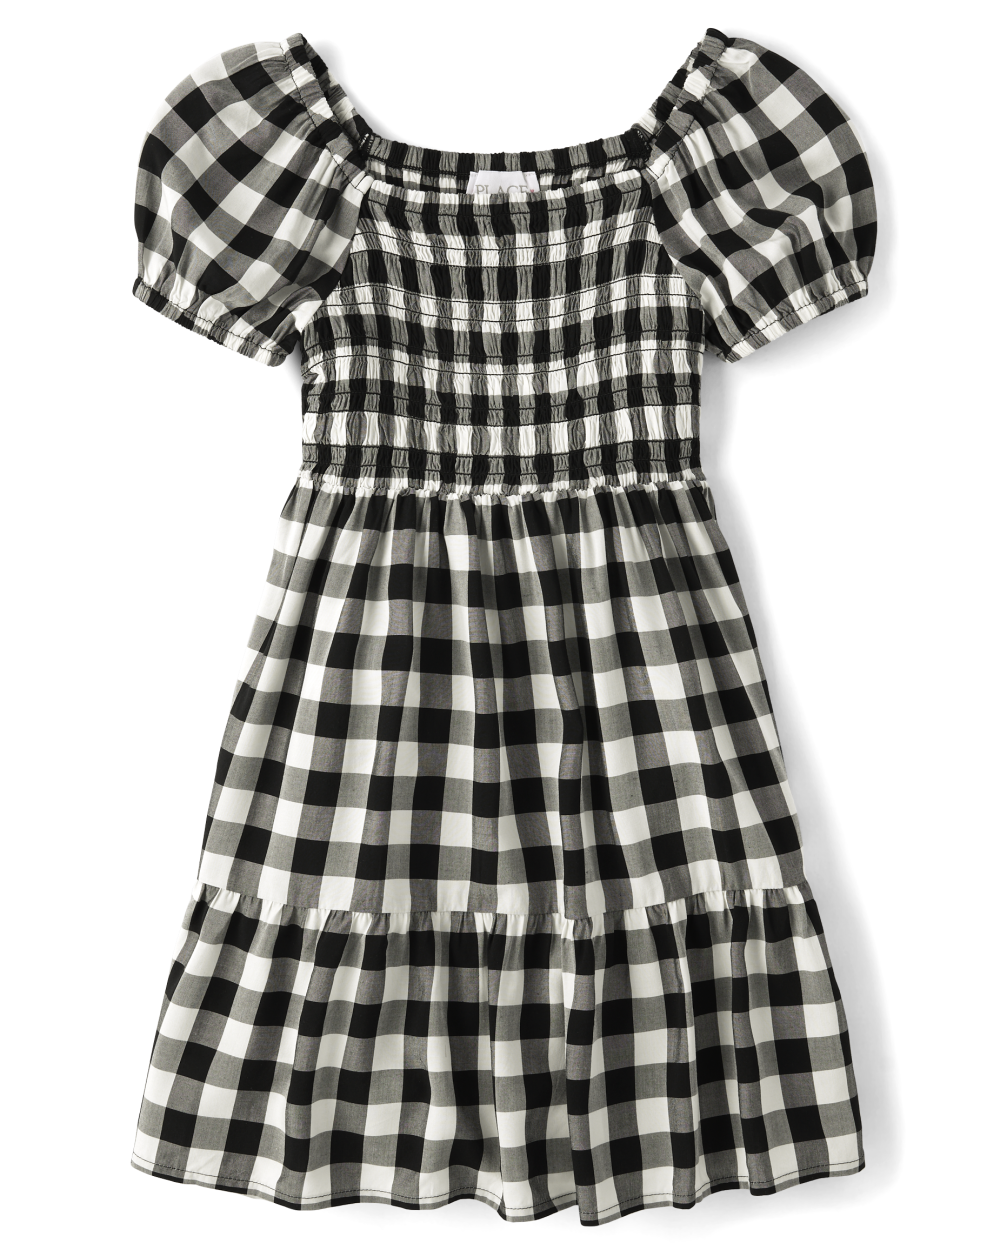 Girls Smocked Square Neck Above the Knee Checkered Gingham Print Puff Sleeves Short Sleeves Sleeves Rayon Dress With Ruffles